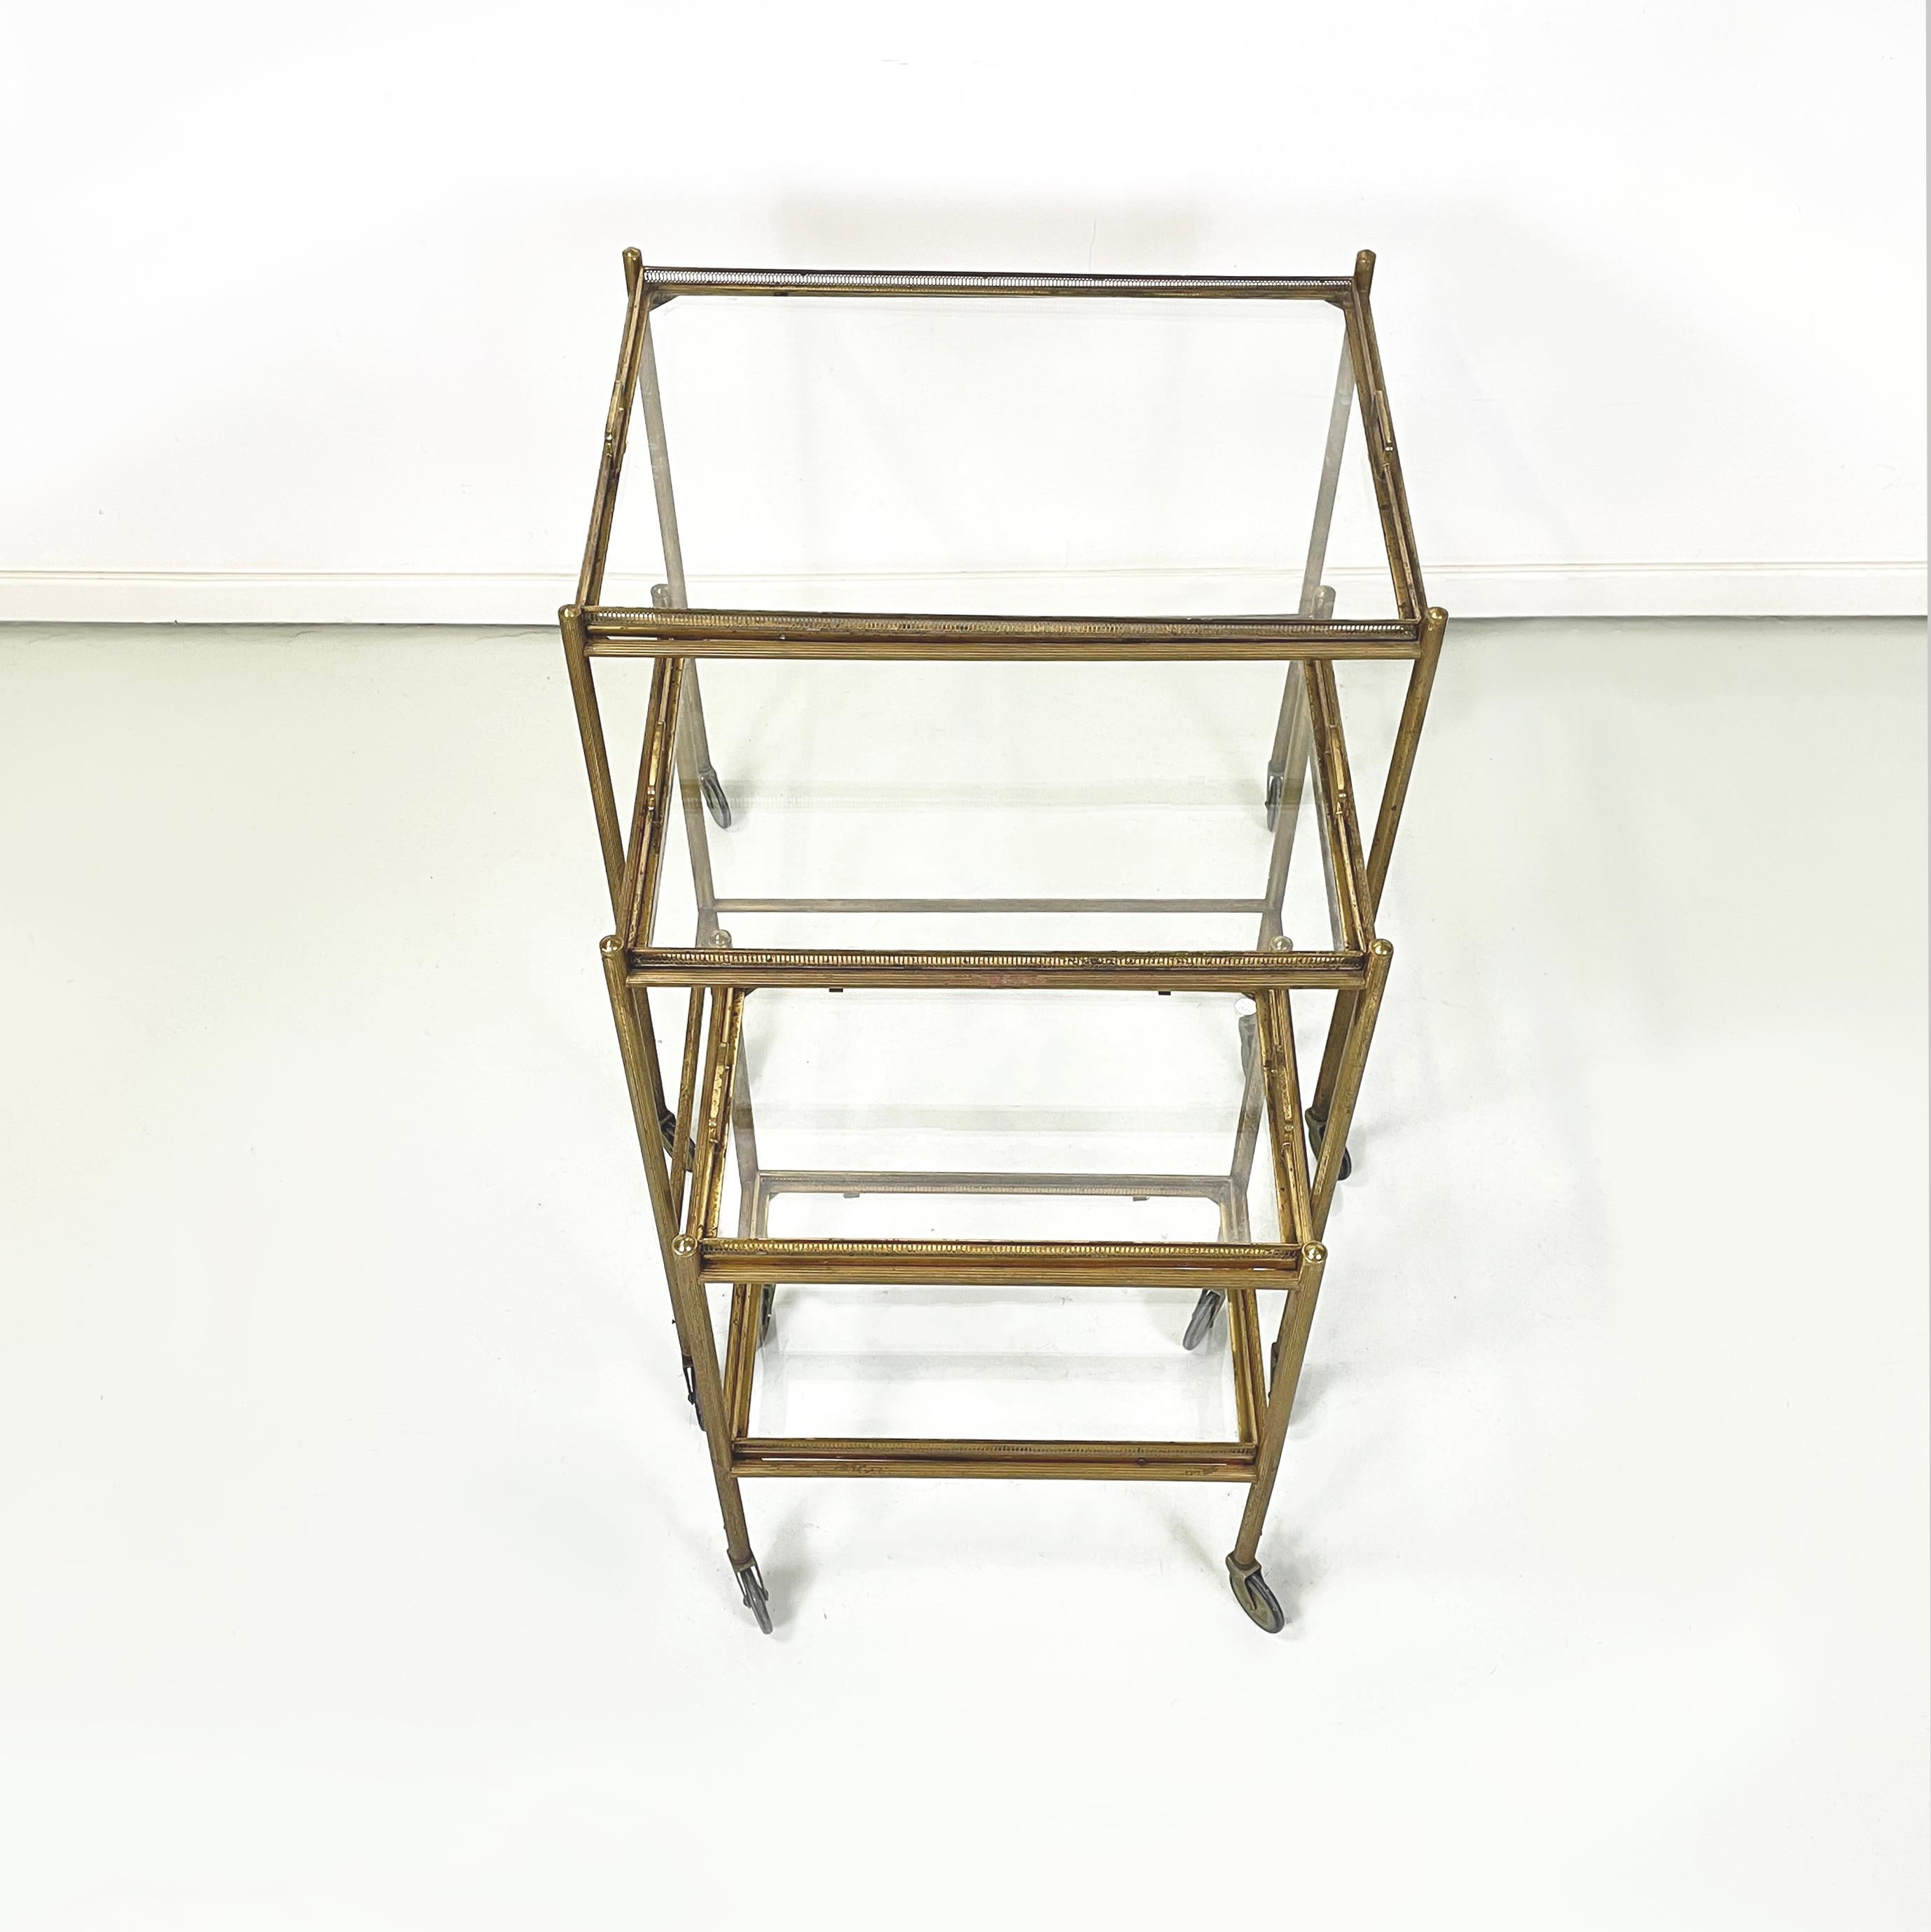 Italian mid-century modern Brass and glass carts with tray, 1960s For Sale 1